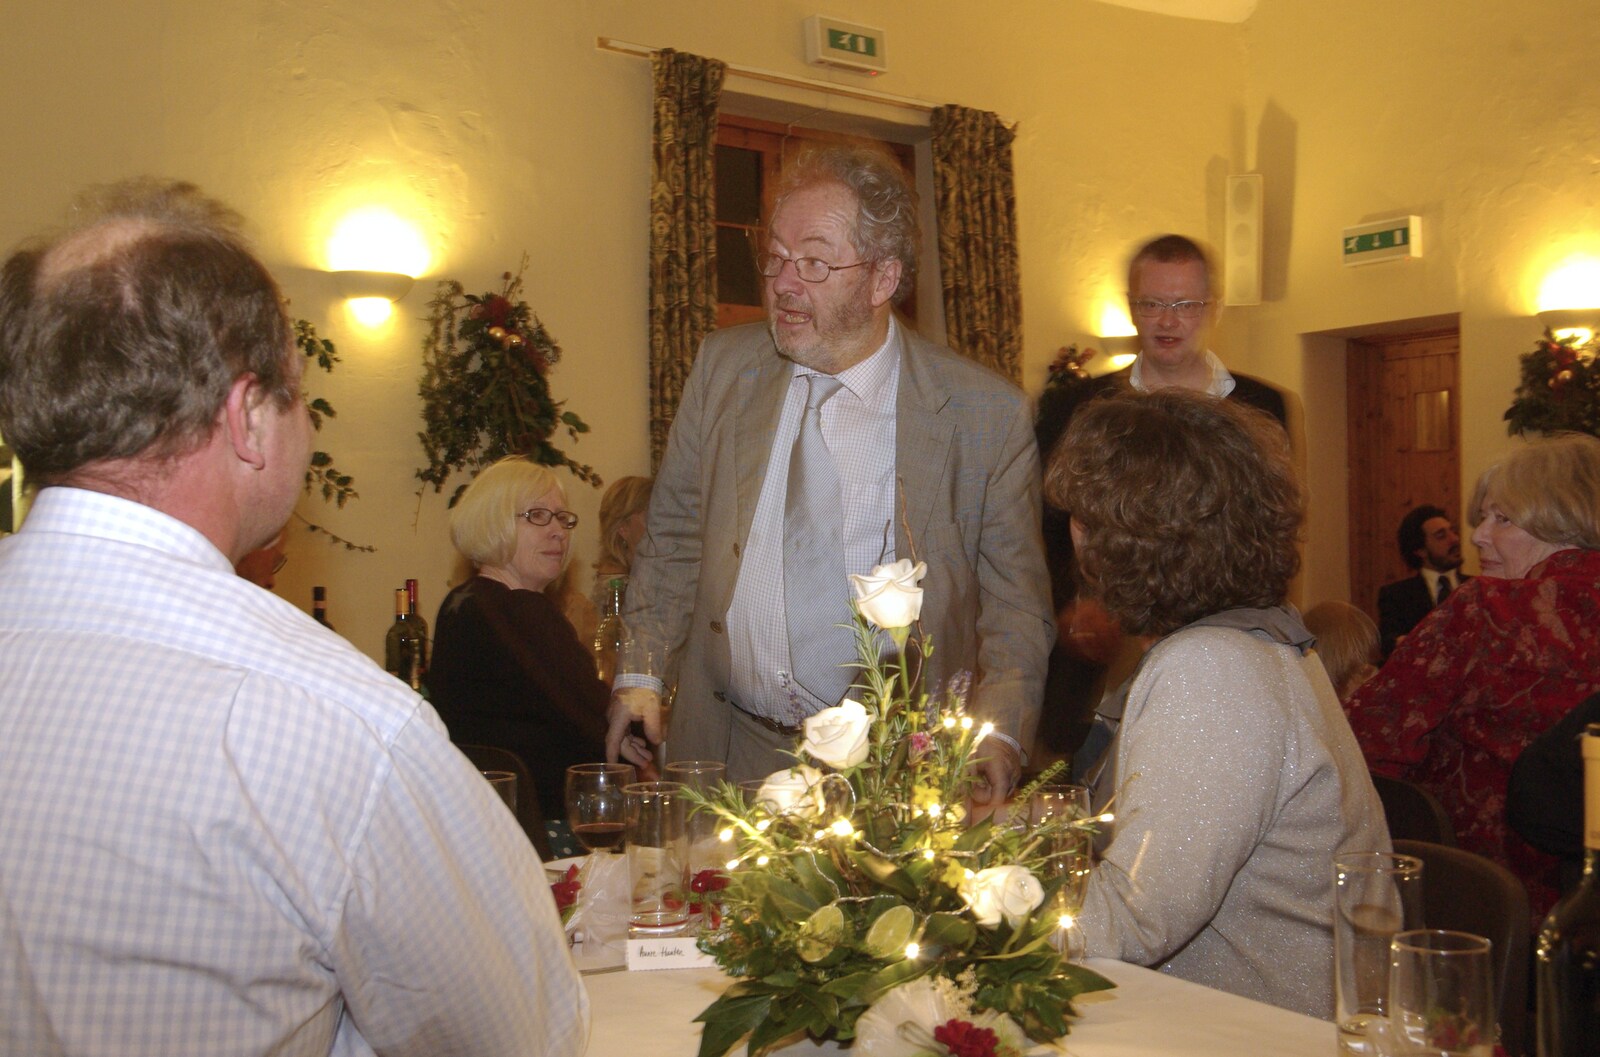 The bride's dad from An Oxford Wedding, Iffley, Oxfordshire - 20th December 2008